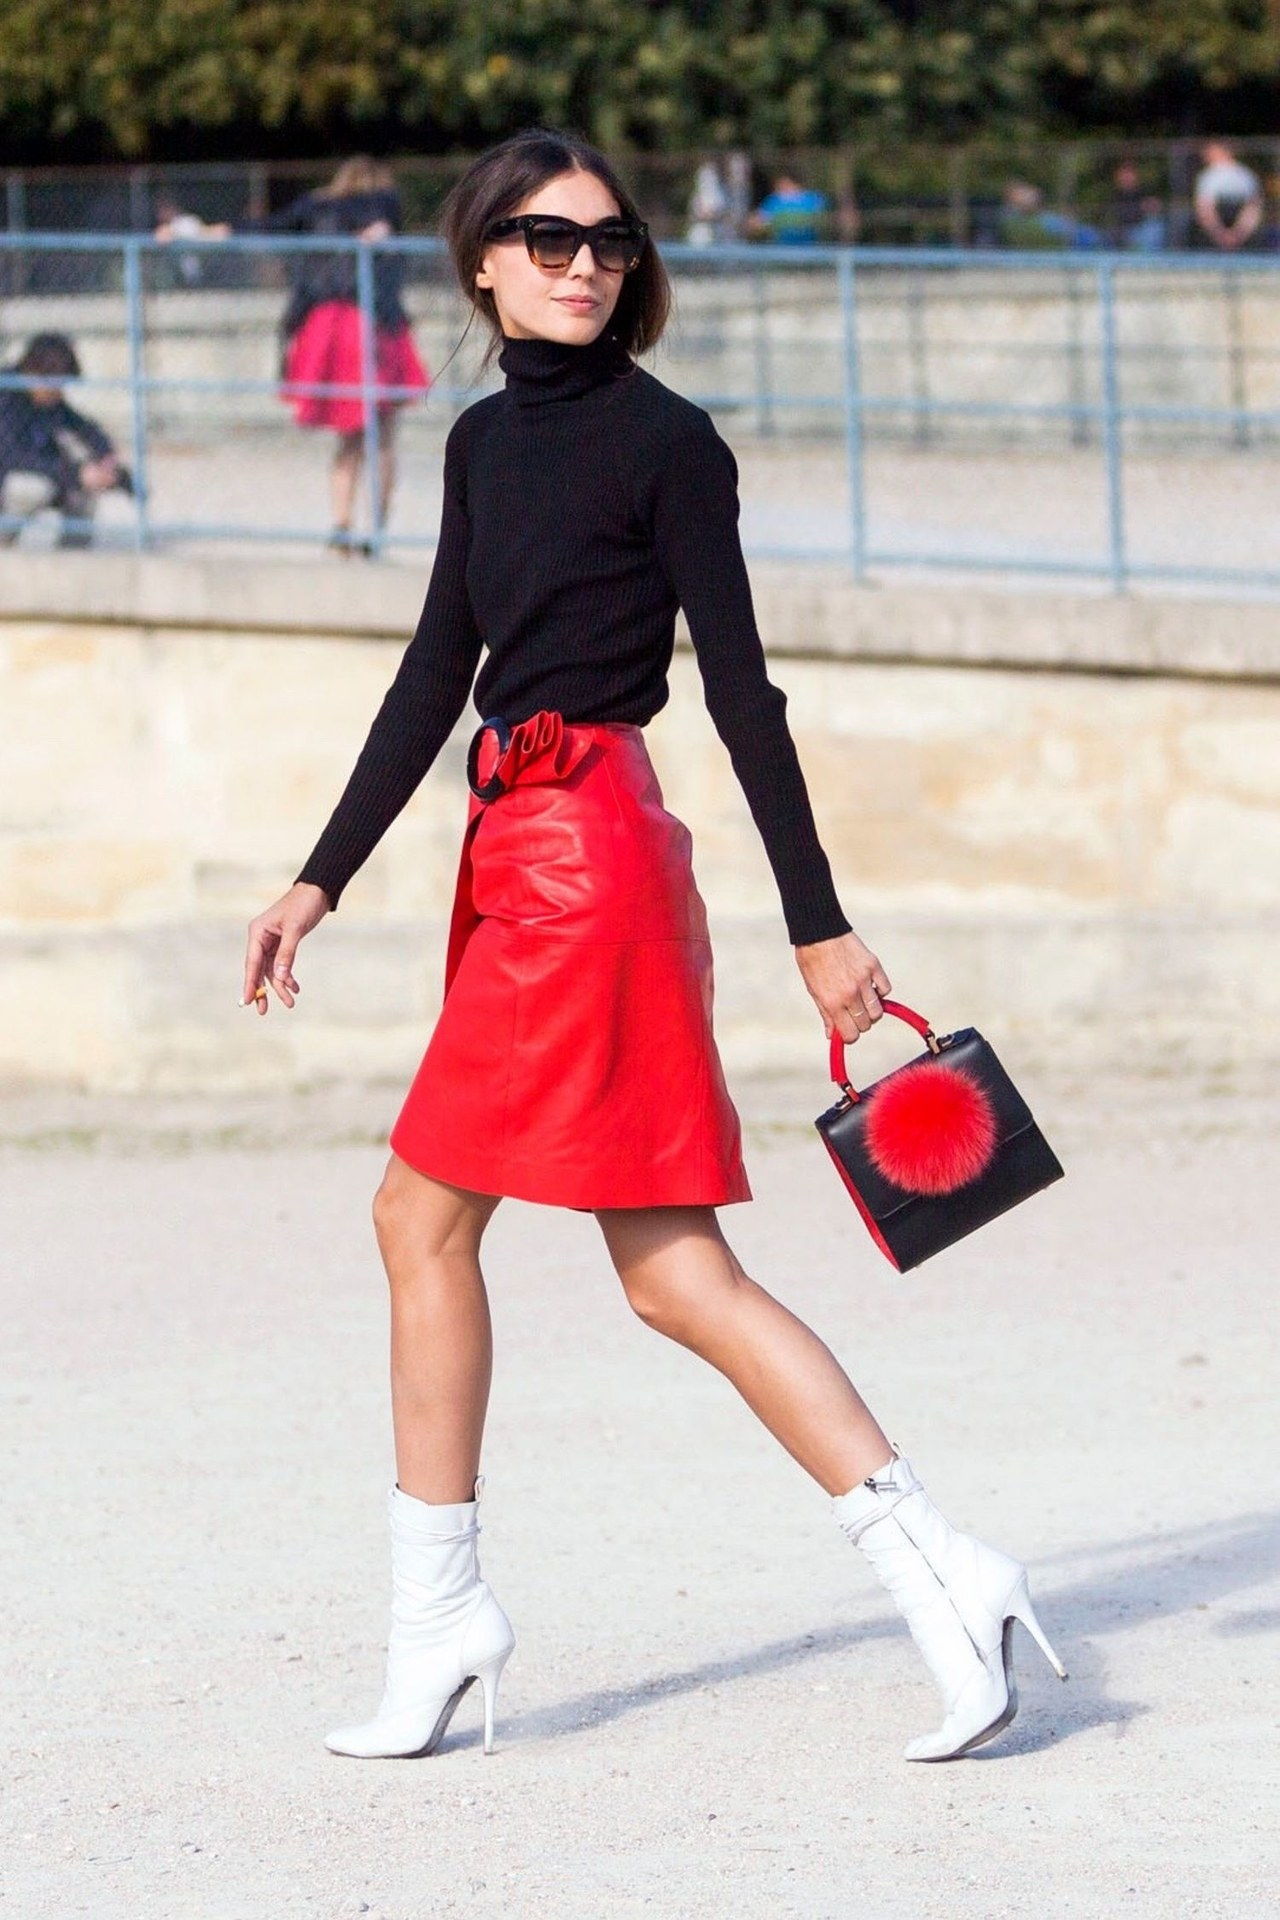 zima red outfit ideas melodie jeng skirt black tutleneck